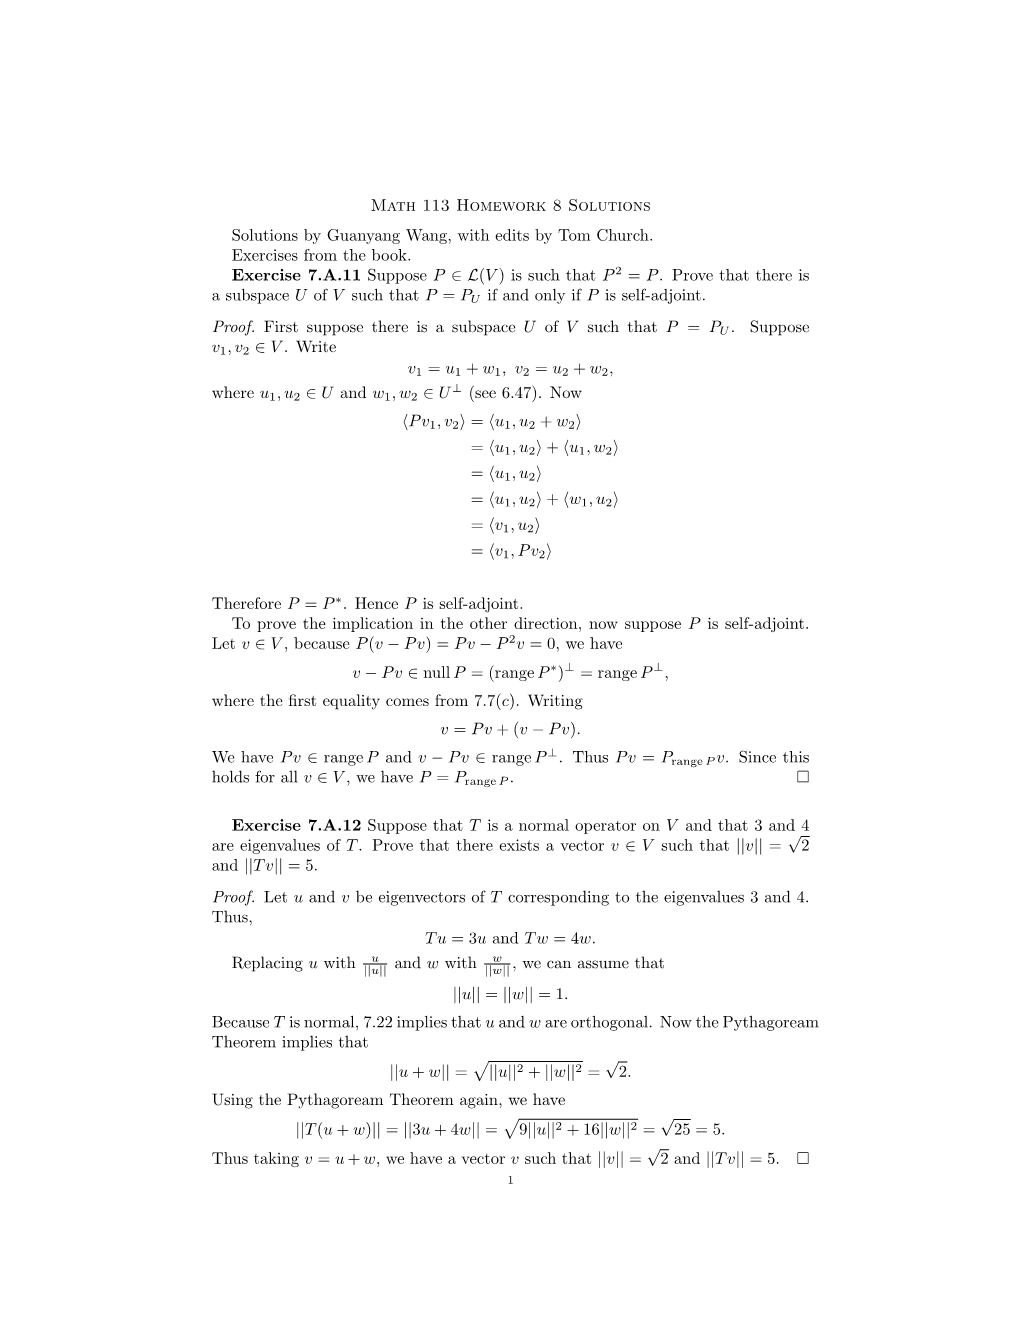 Math 113 Homework 8 Solutions Solutions by Guanyang Wang, with Edits by Tom Church